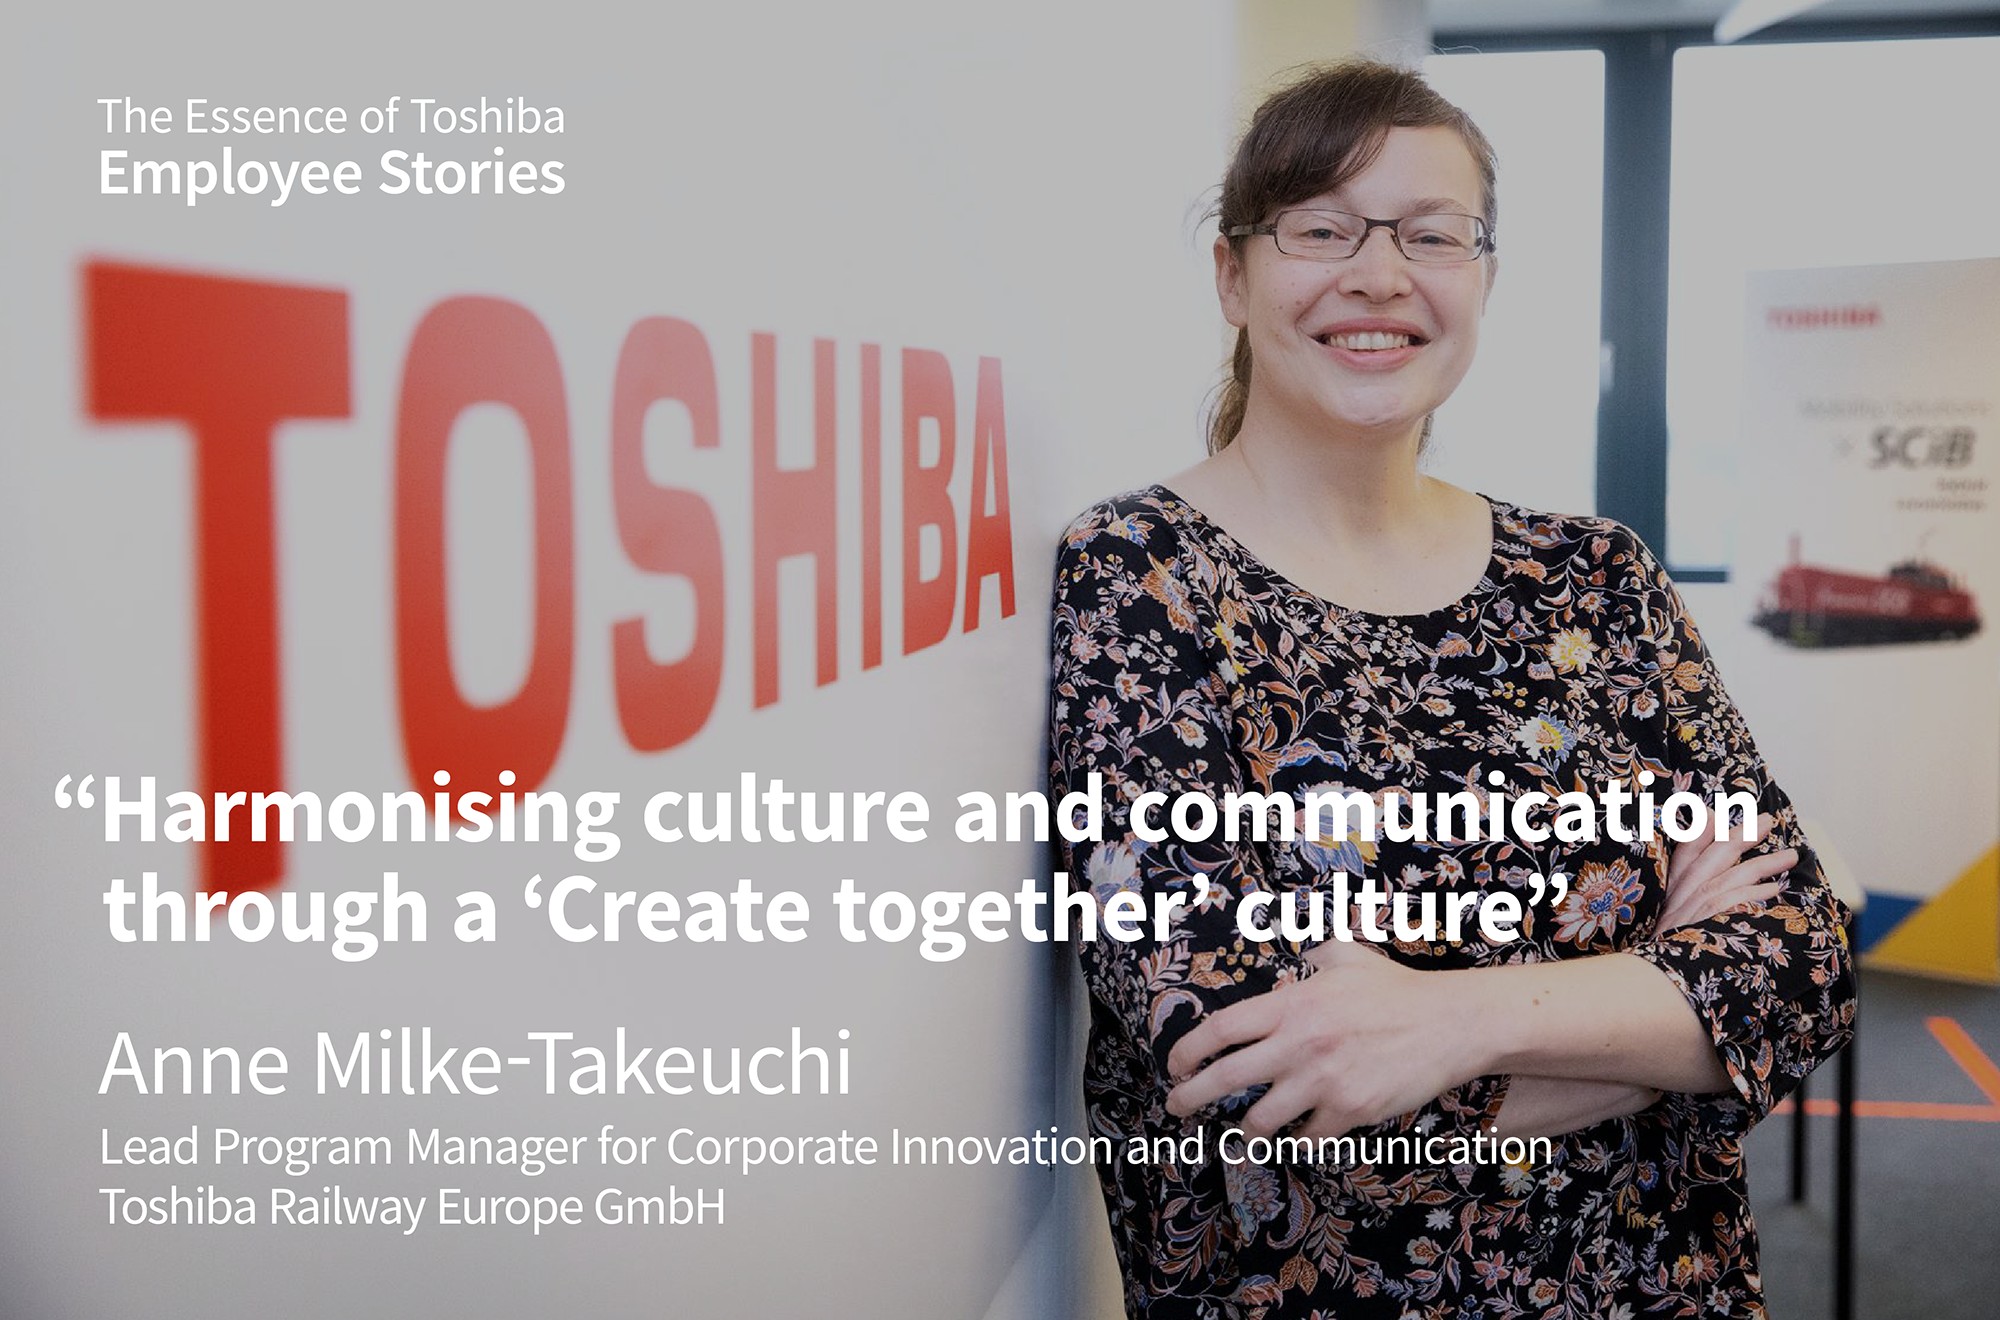 We Are Toshiba: Harmonising Culture and Communication through a ‘Create Together’ Culture